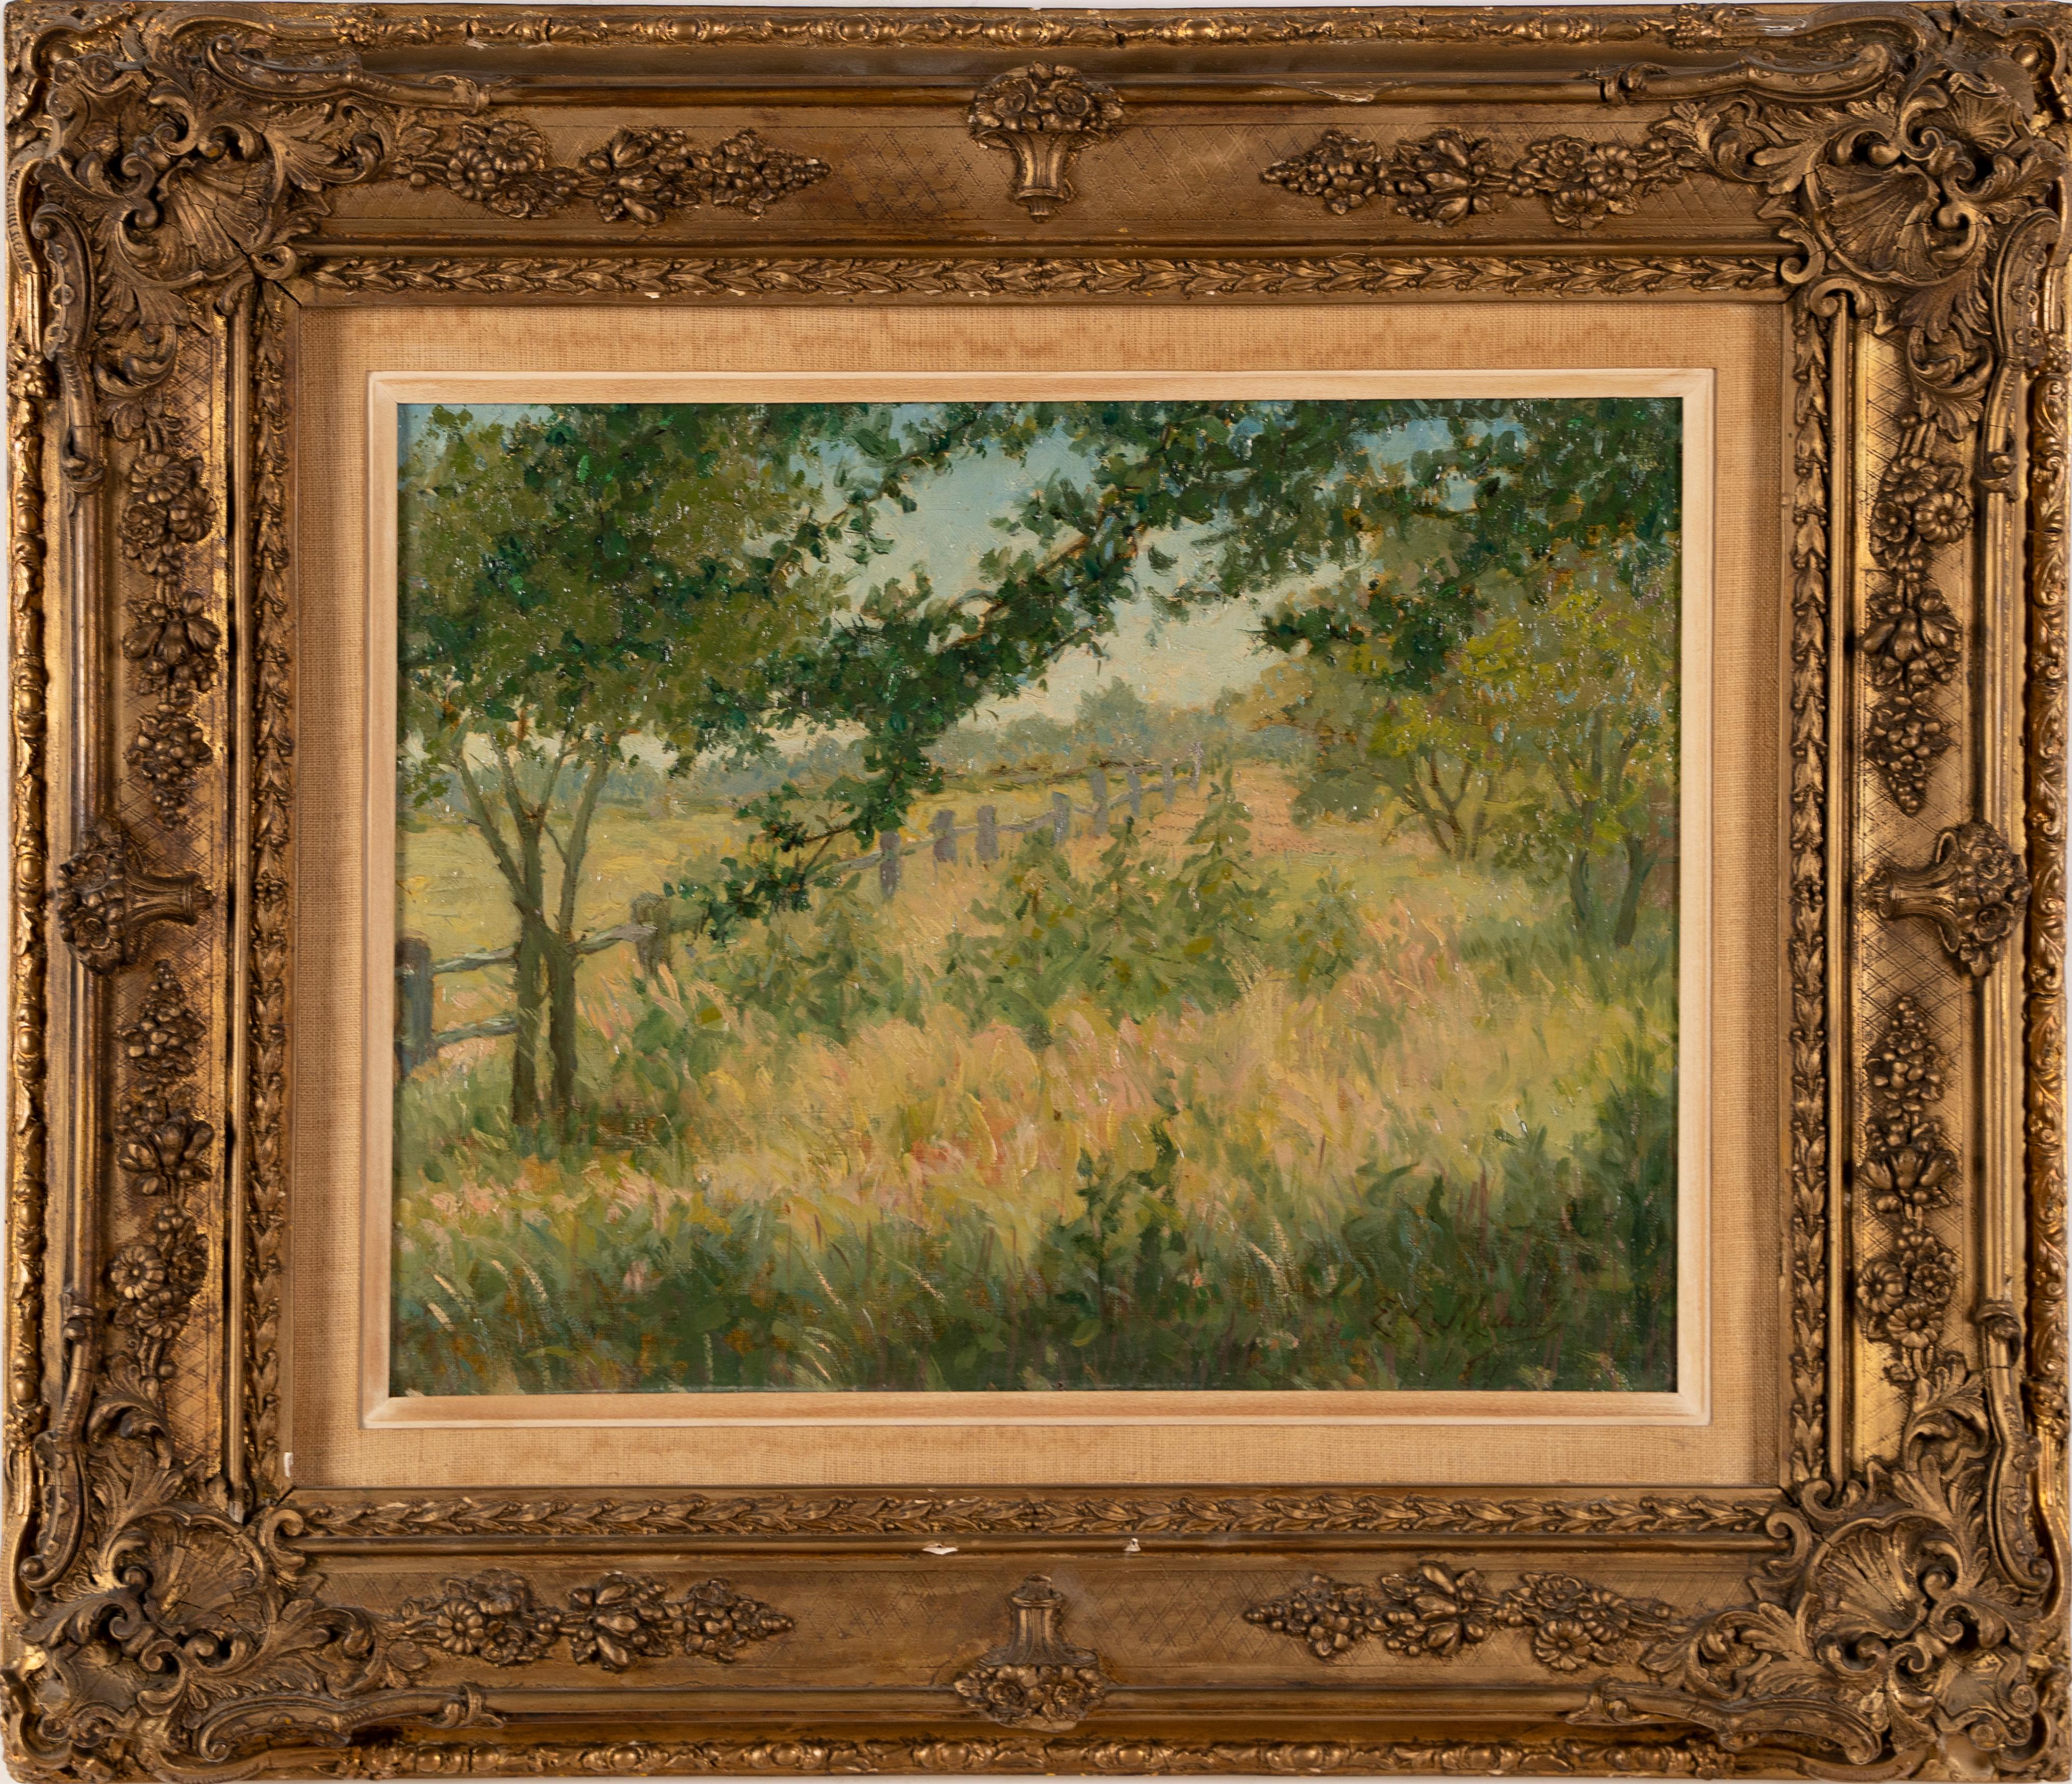 Unknown Landscape Painting - Antique American Impressionist Country Farm Bucolic Rural Landscape Oil Painting